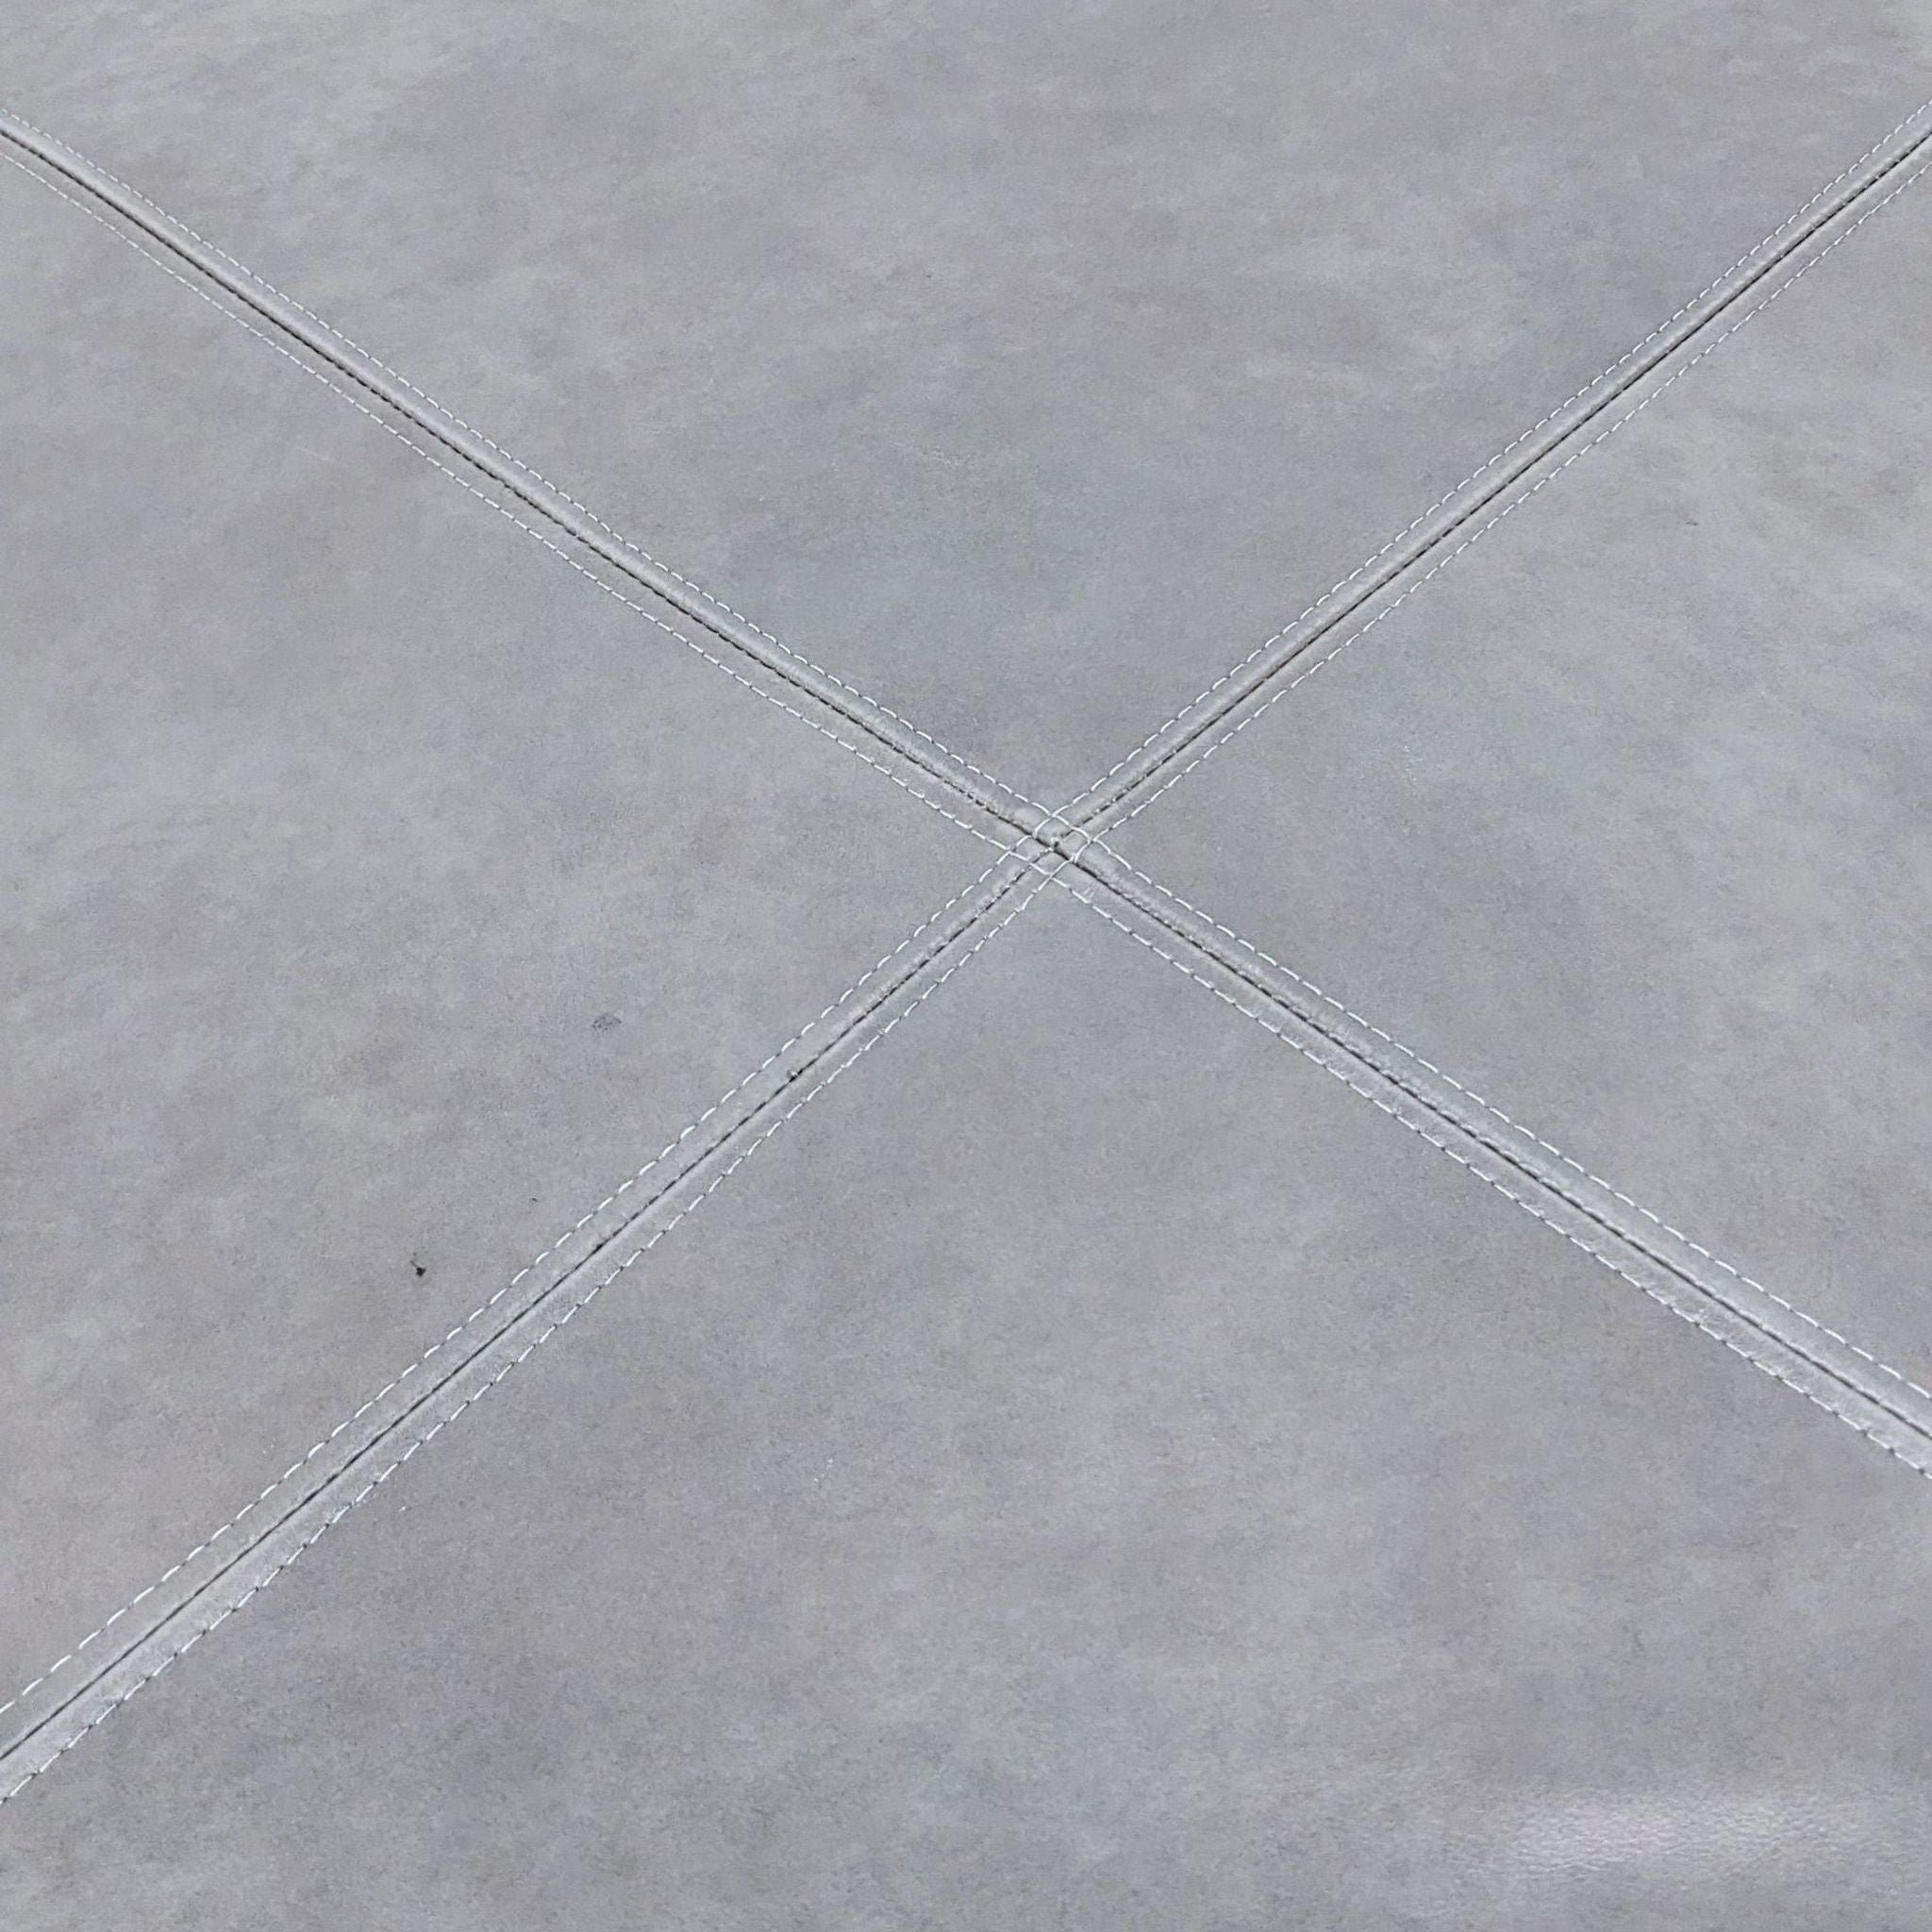 Close-up of gray leather surface with stitched detailing.